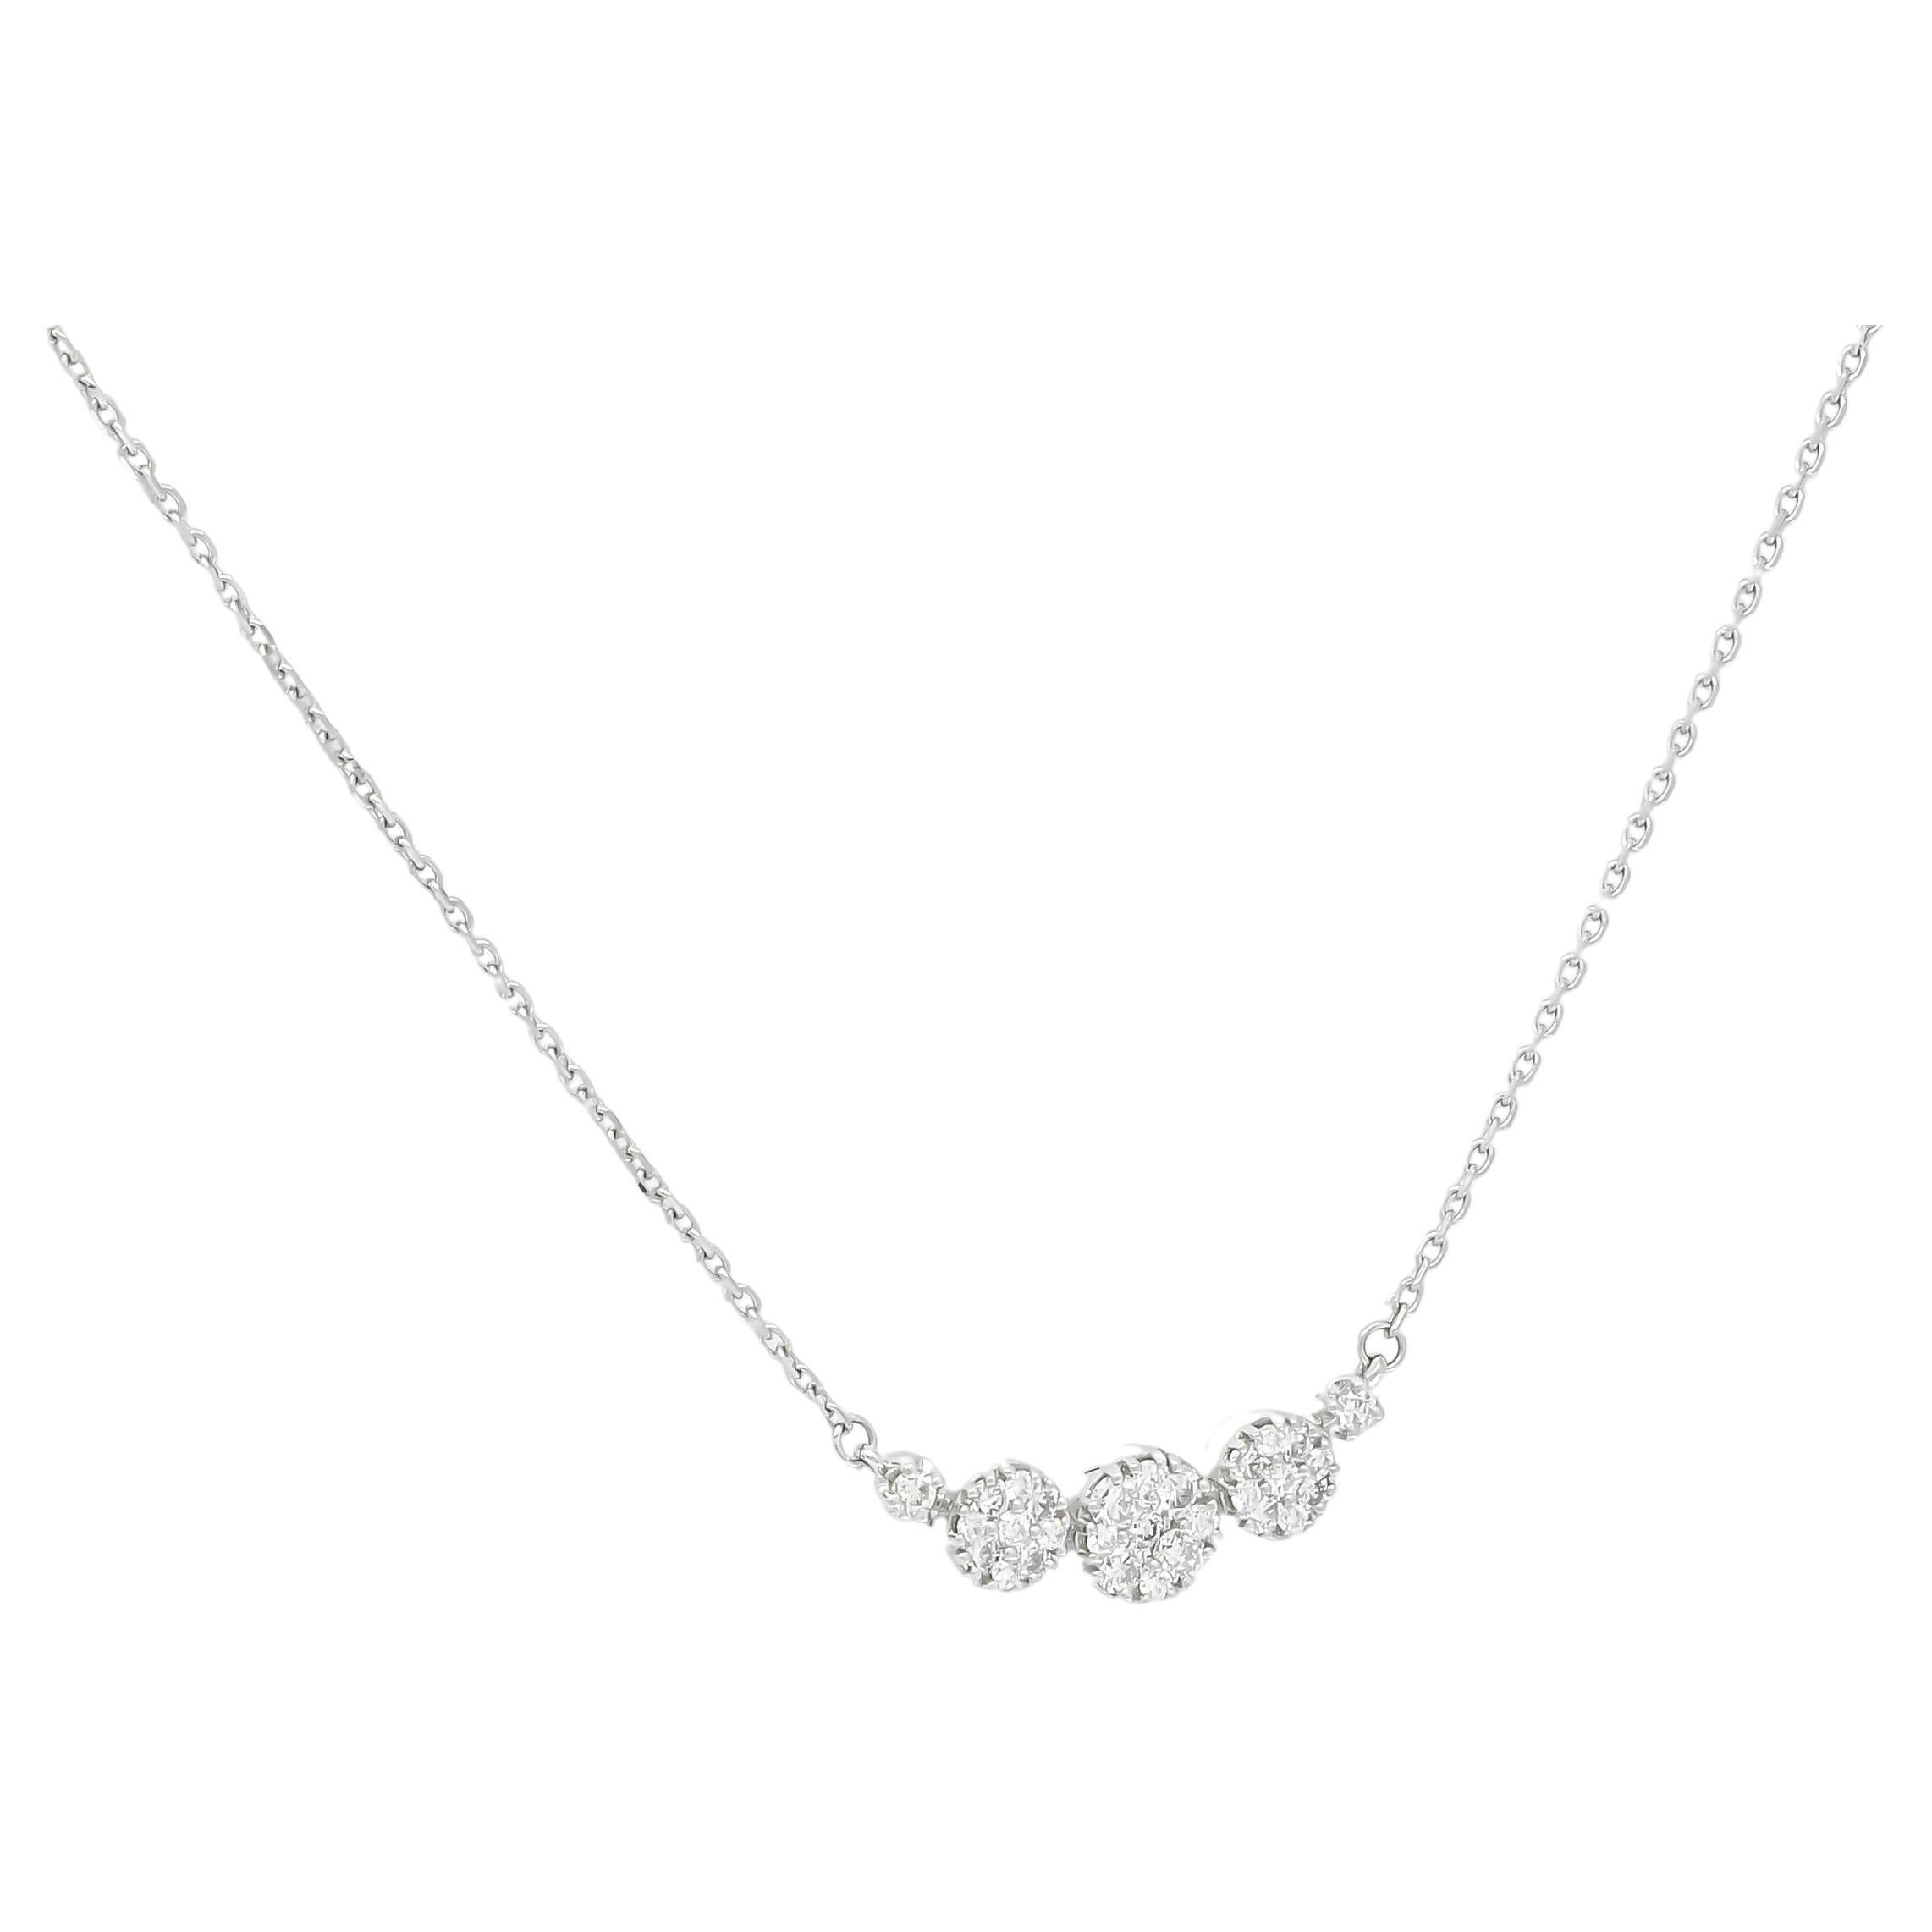 Natural Diamond 0.33 carats 18 KT White Gold Chain Cluster Pendant Necklace  For Sale